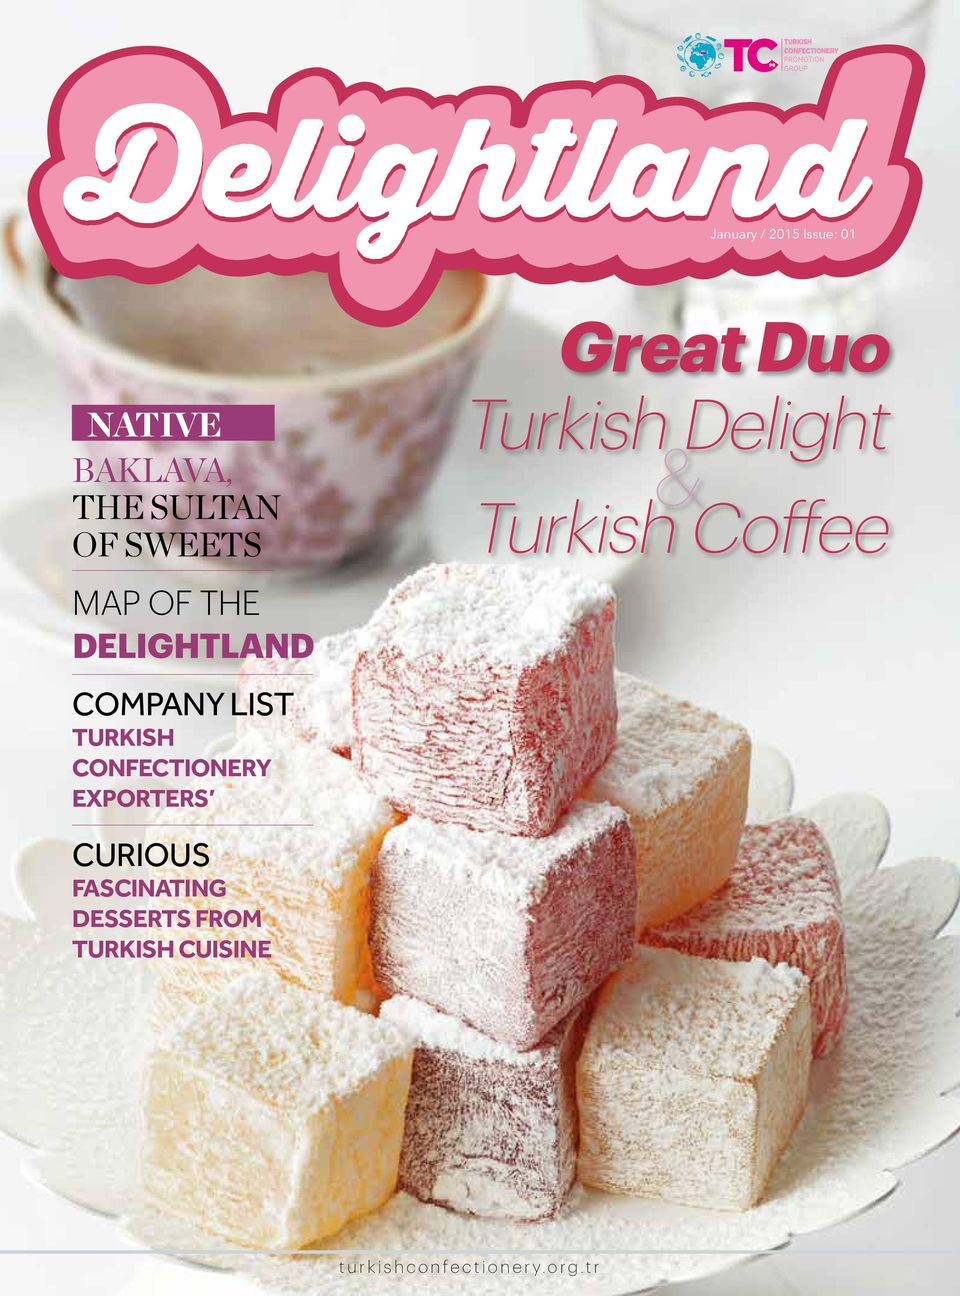 EXPORTERS Great Duo Turkish Delight & Turkish Coffee CURIOUS